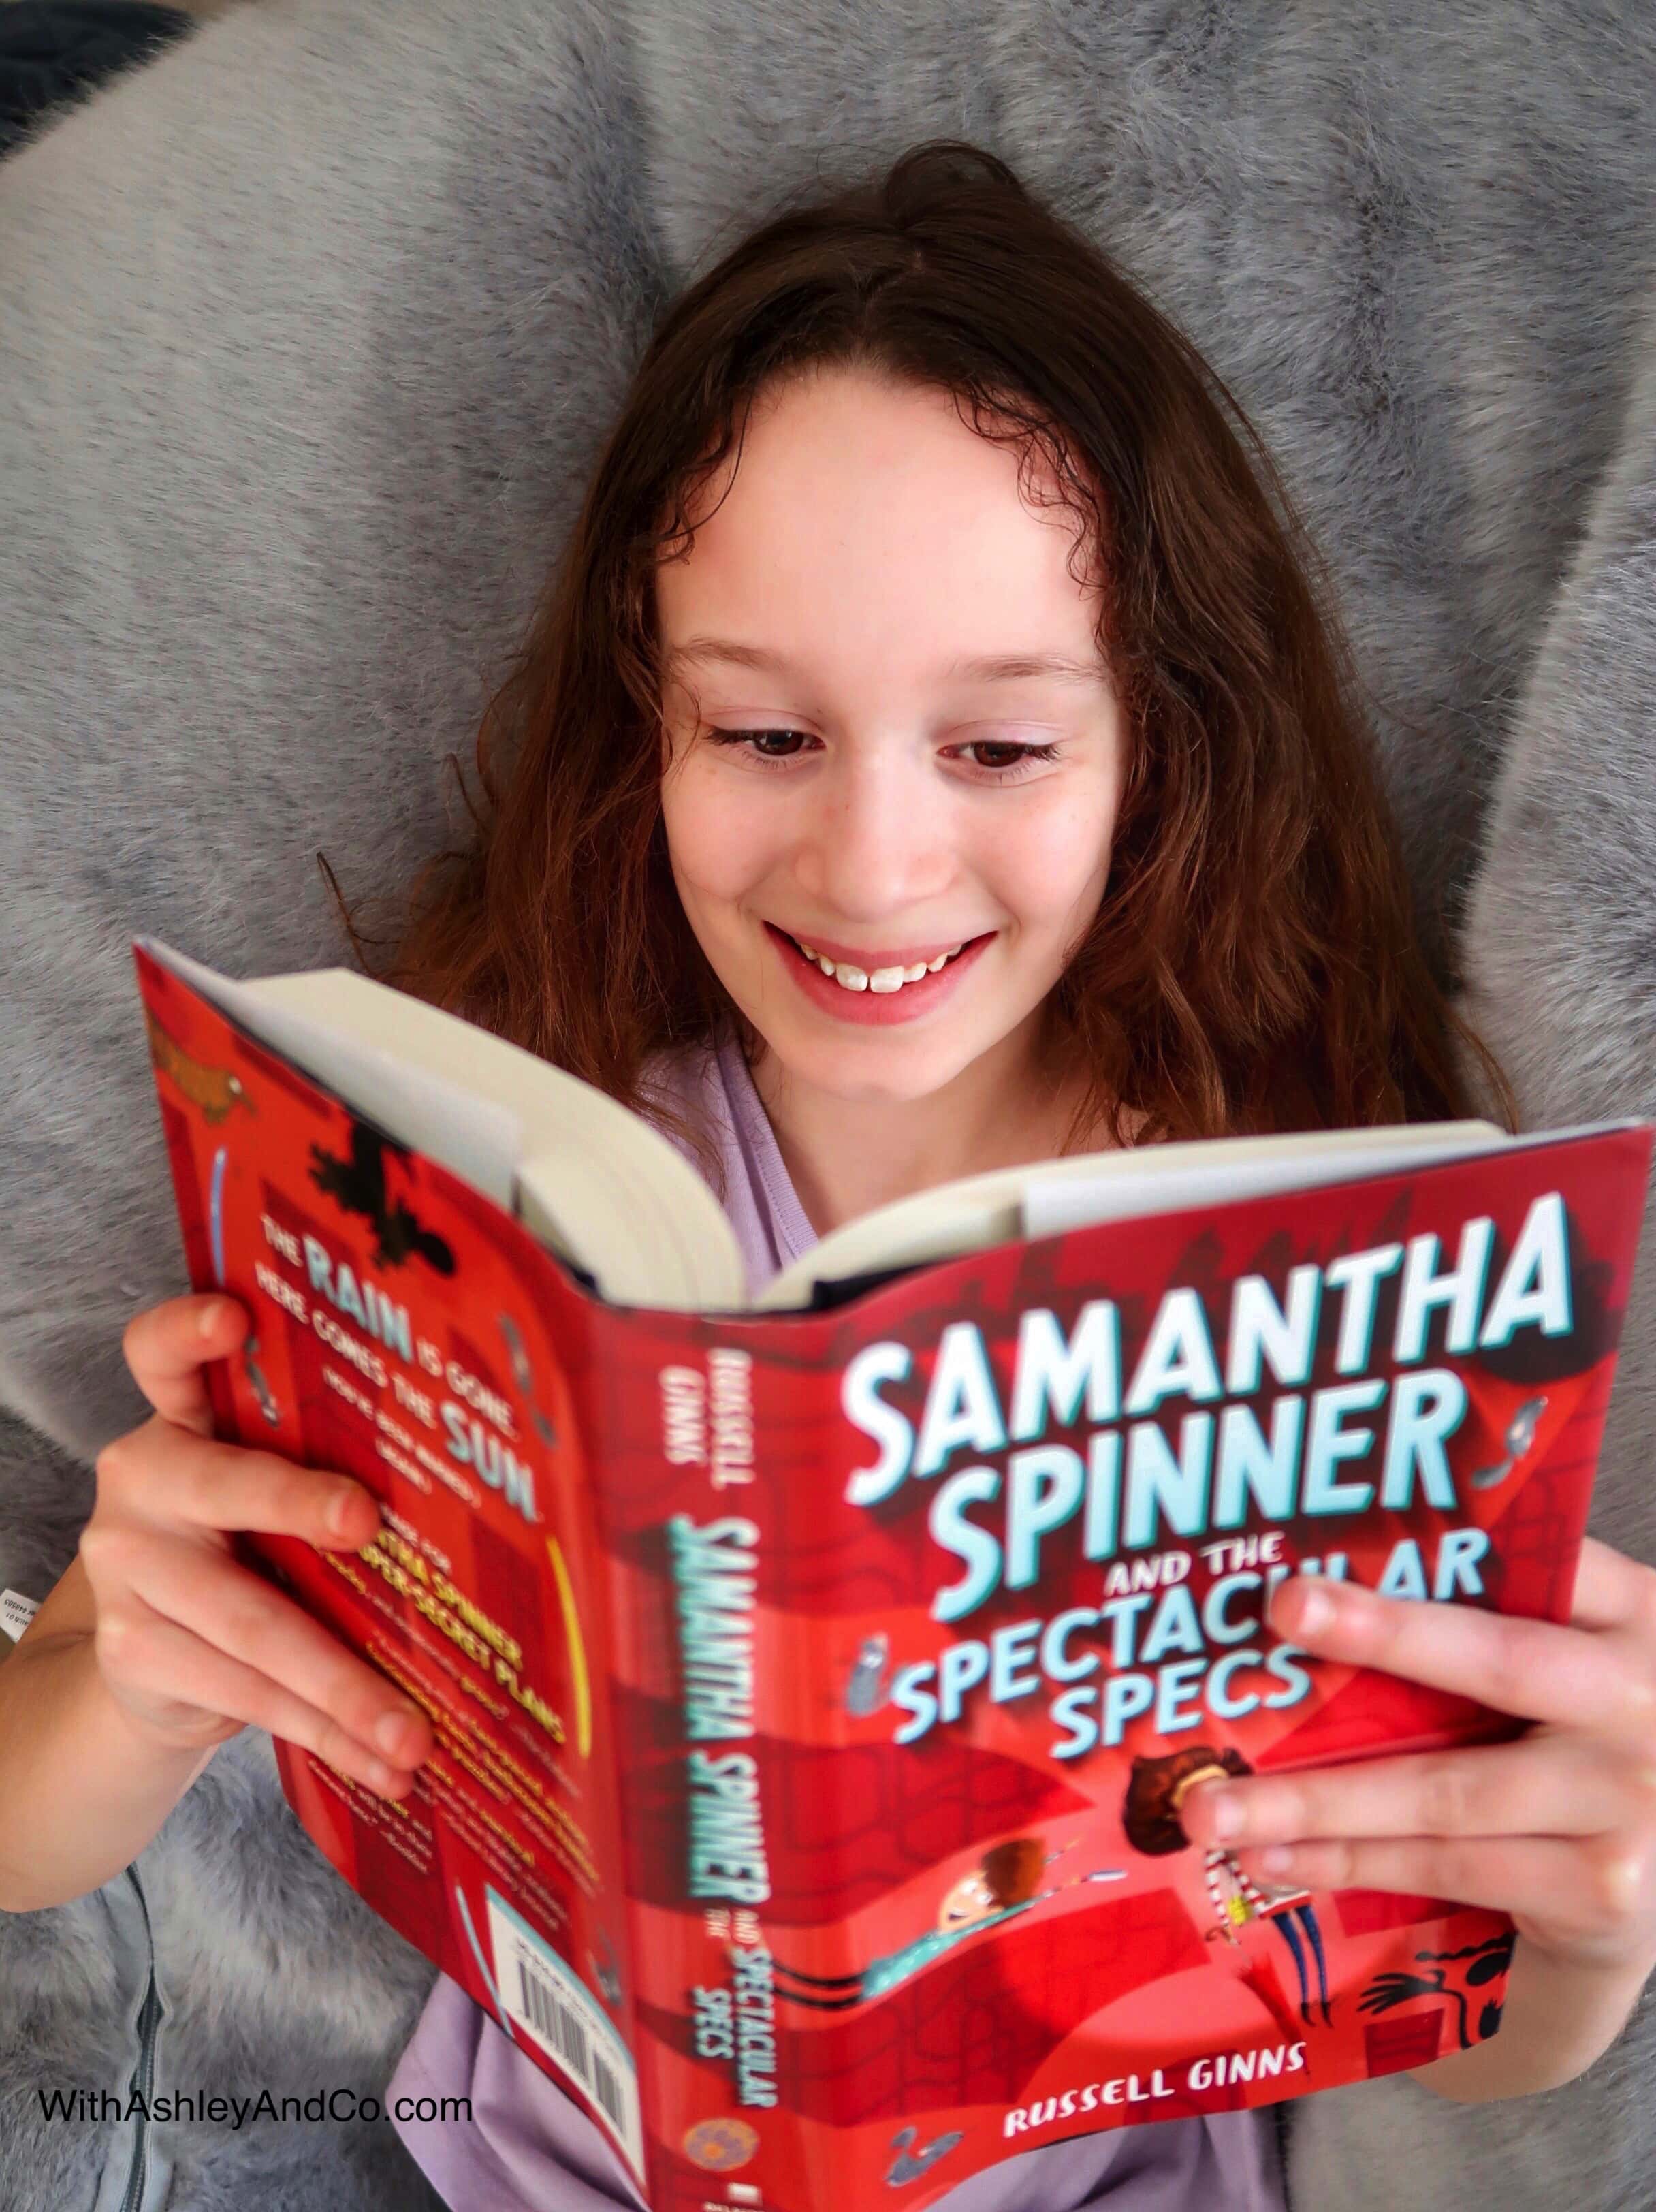 Samantha Spinner and The Spectacular Specs Book Review